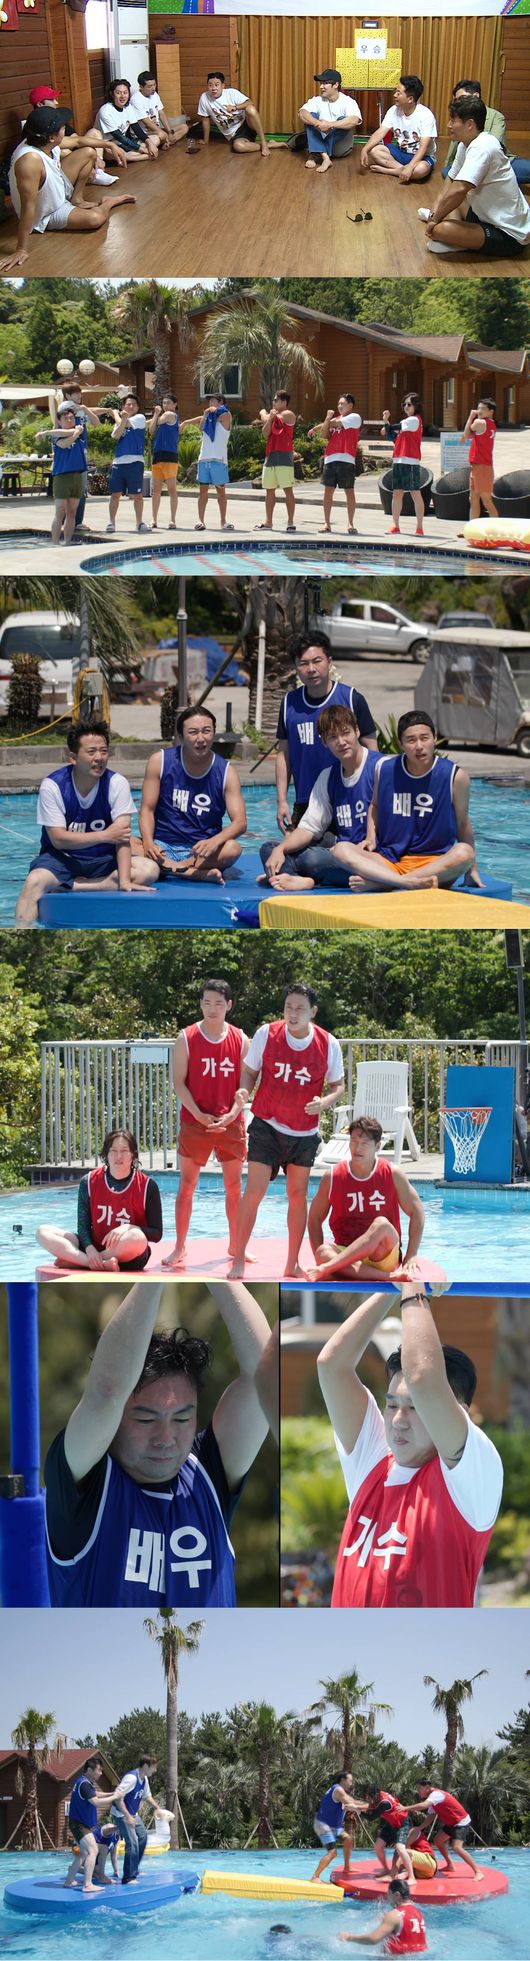 On SBS My Little Old Boy, nine My Little Old Boy burst into high-end honey jam chemistry and give a cool laugh bomb to the house theater.On this day, the 3rd My Little Old Boy Summer Unite Competition was held to focus the attention of the studio.Singer team Lee Sang-min, Kim Jong-guk, Kim Hee-chul and Park Gun, who lost the last unity tournament, pledged their desire to Actor Team Tak Jae-hun, Im Won-hee, Kim Jun-ho, Oh Min-seok and Choi Jin-hyuk.In particular, in this unity contest, Sons desire to win was heated up as the MVP product was revealed to the big gift (?) presented by SBS president.Since then, the Underwater environment confrontation, which has become as large as the product, has been unfolded, raising expectations for everyone.But when the game started, unlike Sons full-on motivation, he made an unintended gesture and laughed.Underwater environment The oldest person in the My Little Old Boy Tak Jae-hun, who was wrestling with the iron rod, was a laughing humiliation at the blow of the conversion by Park Gun (?), and My Little Old Boy official the weakest rival Lee Sang-min and Im Won-hee were fatefully confronted, and the Bengers were tearful and tearful.In addition, Choi Jin-hyuk, who wore jeans instead of swimwear, struggled in the water (?), and suddenly emerged as a laughing first-class person with a handsome face.On the other hand, during the buoy showdown, the last person was born, not the end of the capable, and the recording site was devastated.The My Little Old Boy Summer Unity Competition, which can not be found in the least, can be found at My Little Old Boy at 9:05 pm on Sunday, 11th